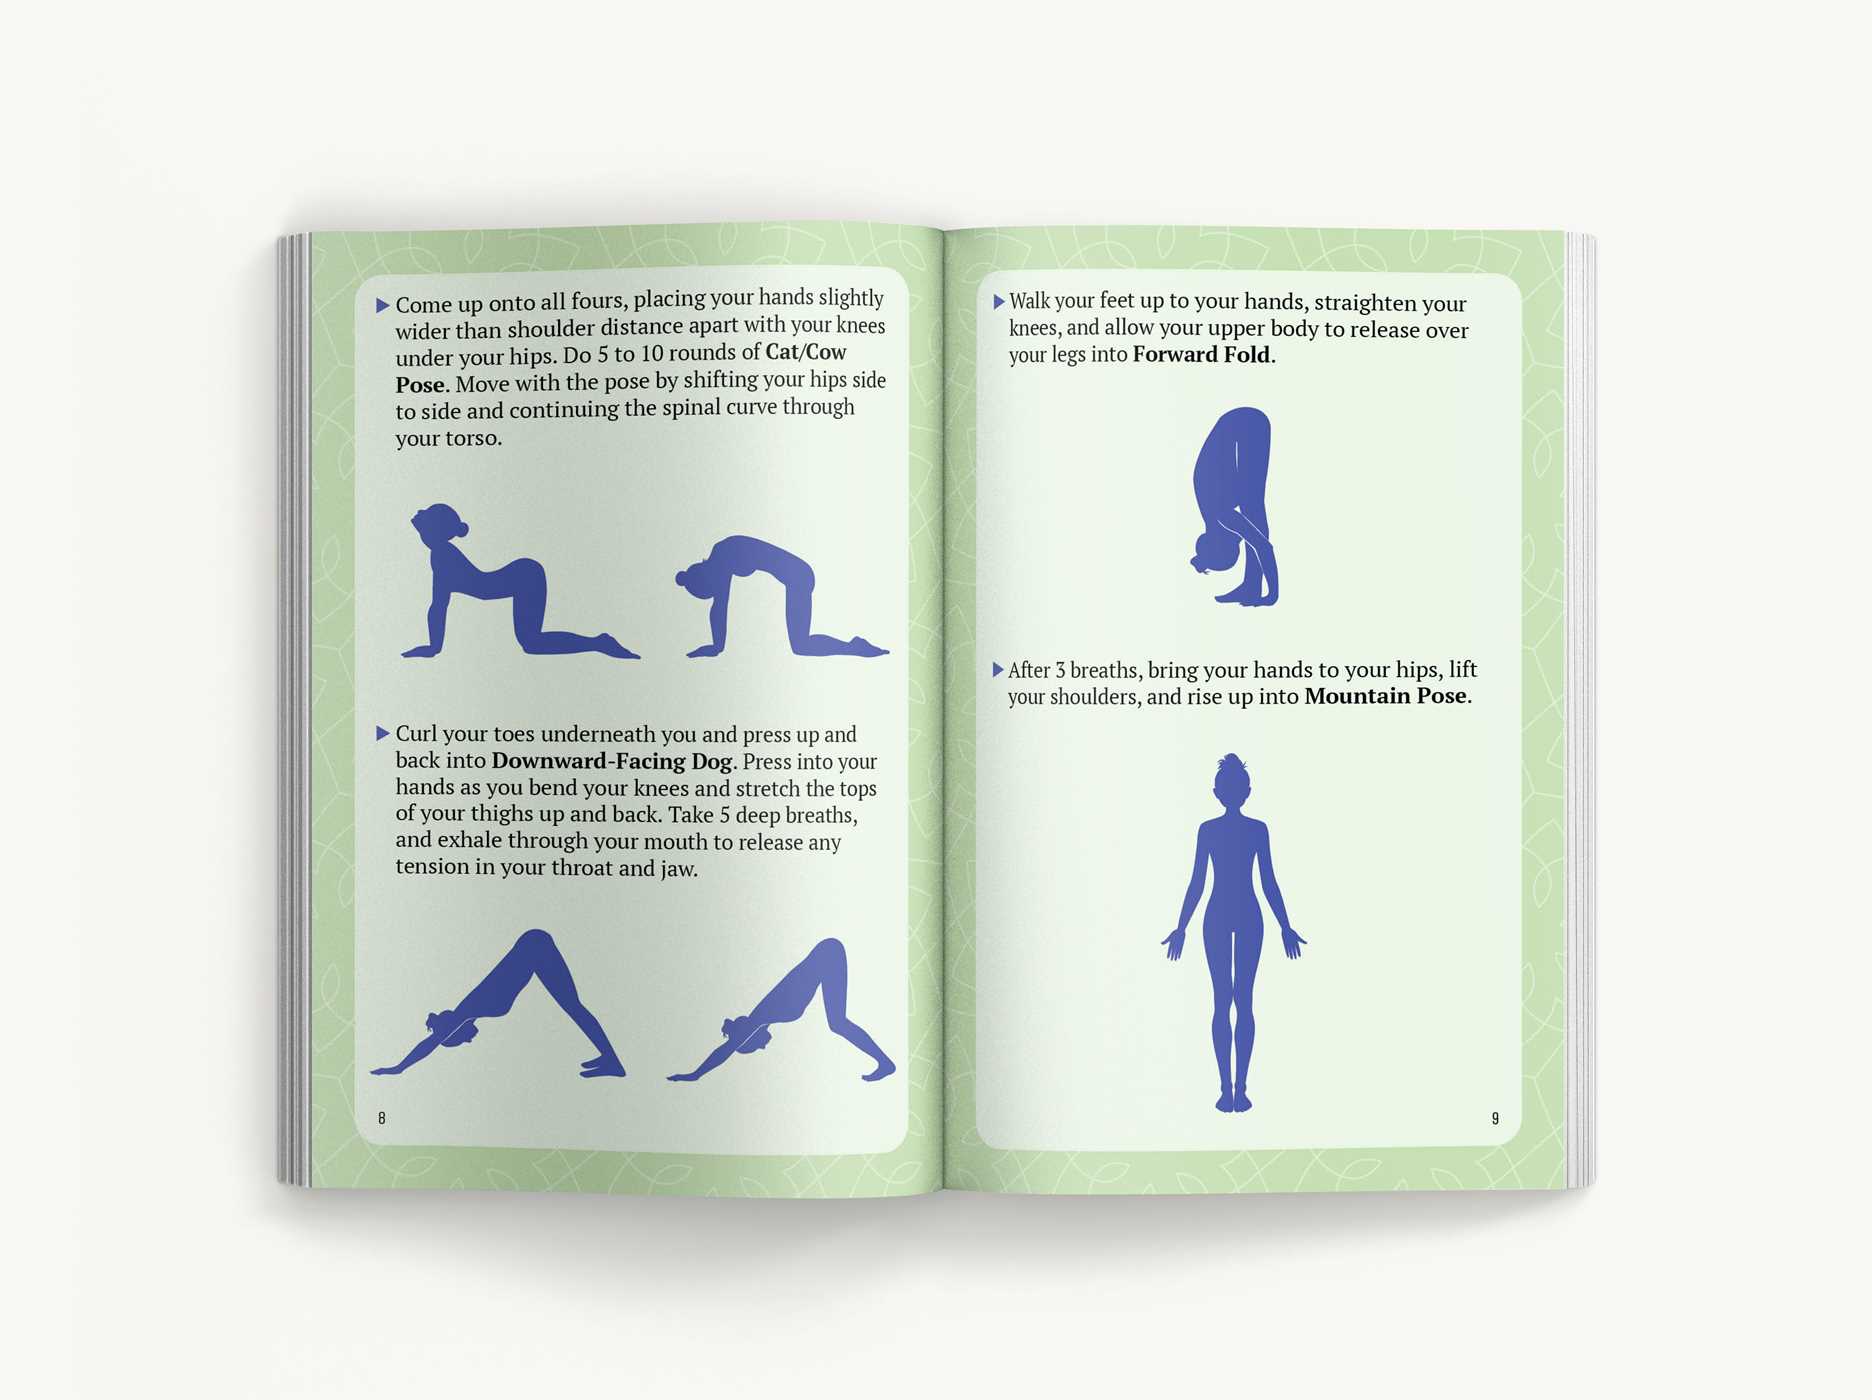 Yoga for Beginners With Over 100 Yoga Poses (Boxed Set): Helps with Weight  Loss, Meditation, Mindfulness and Chakras ebook by Speedy Publishing 